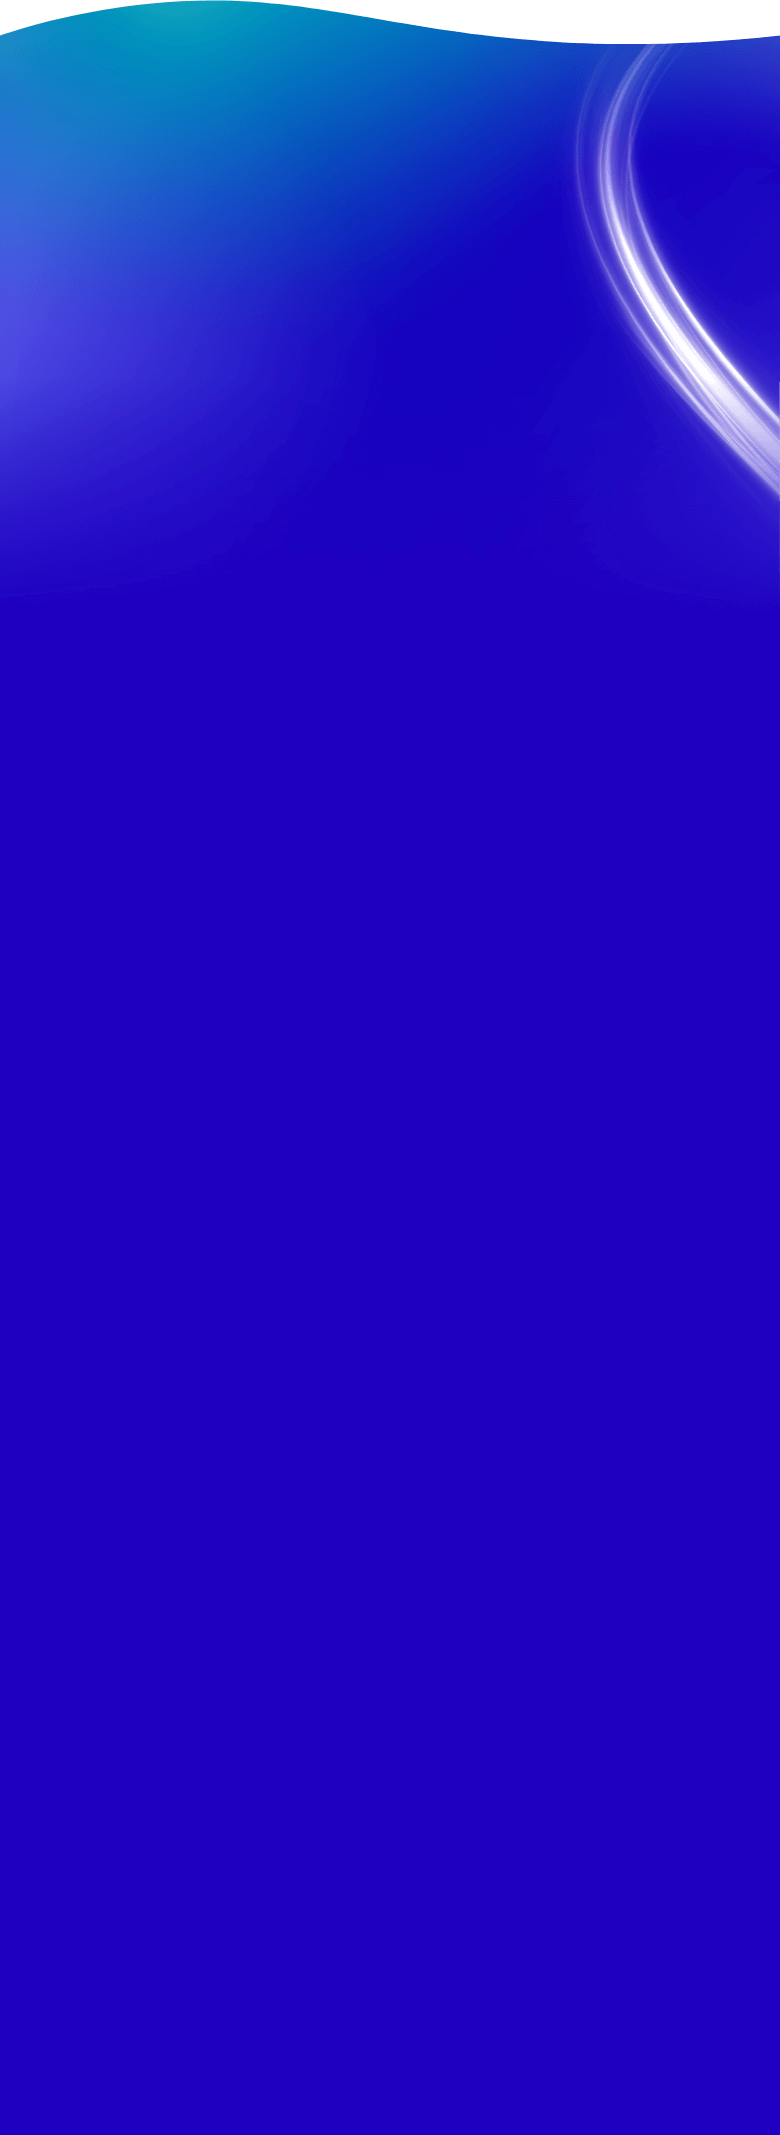 A gradient blue background with a white, curved, light trail.